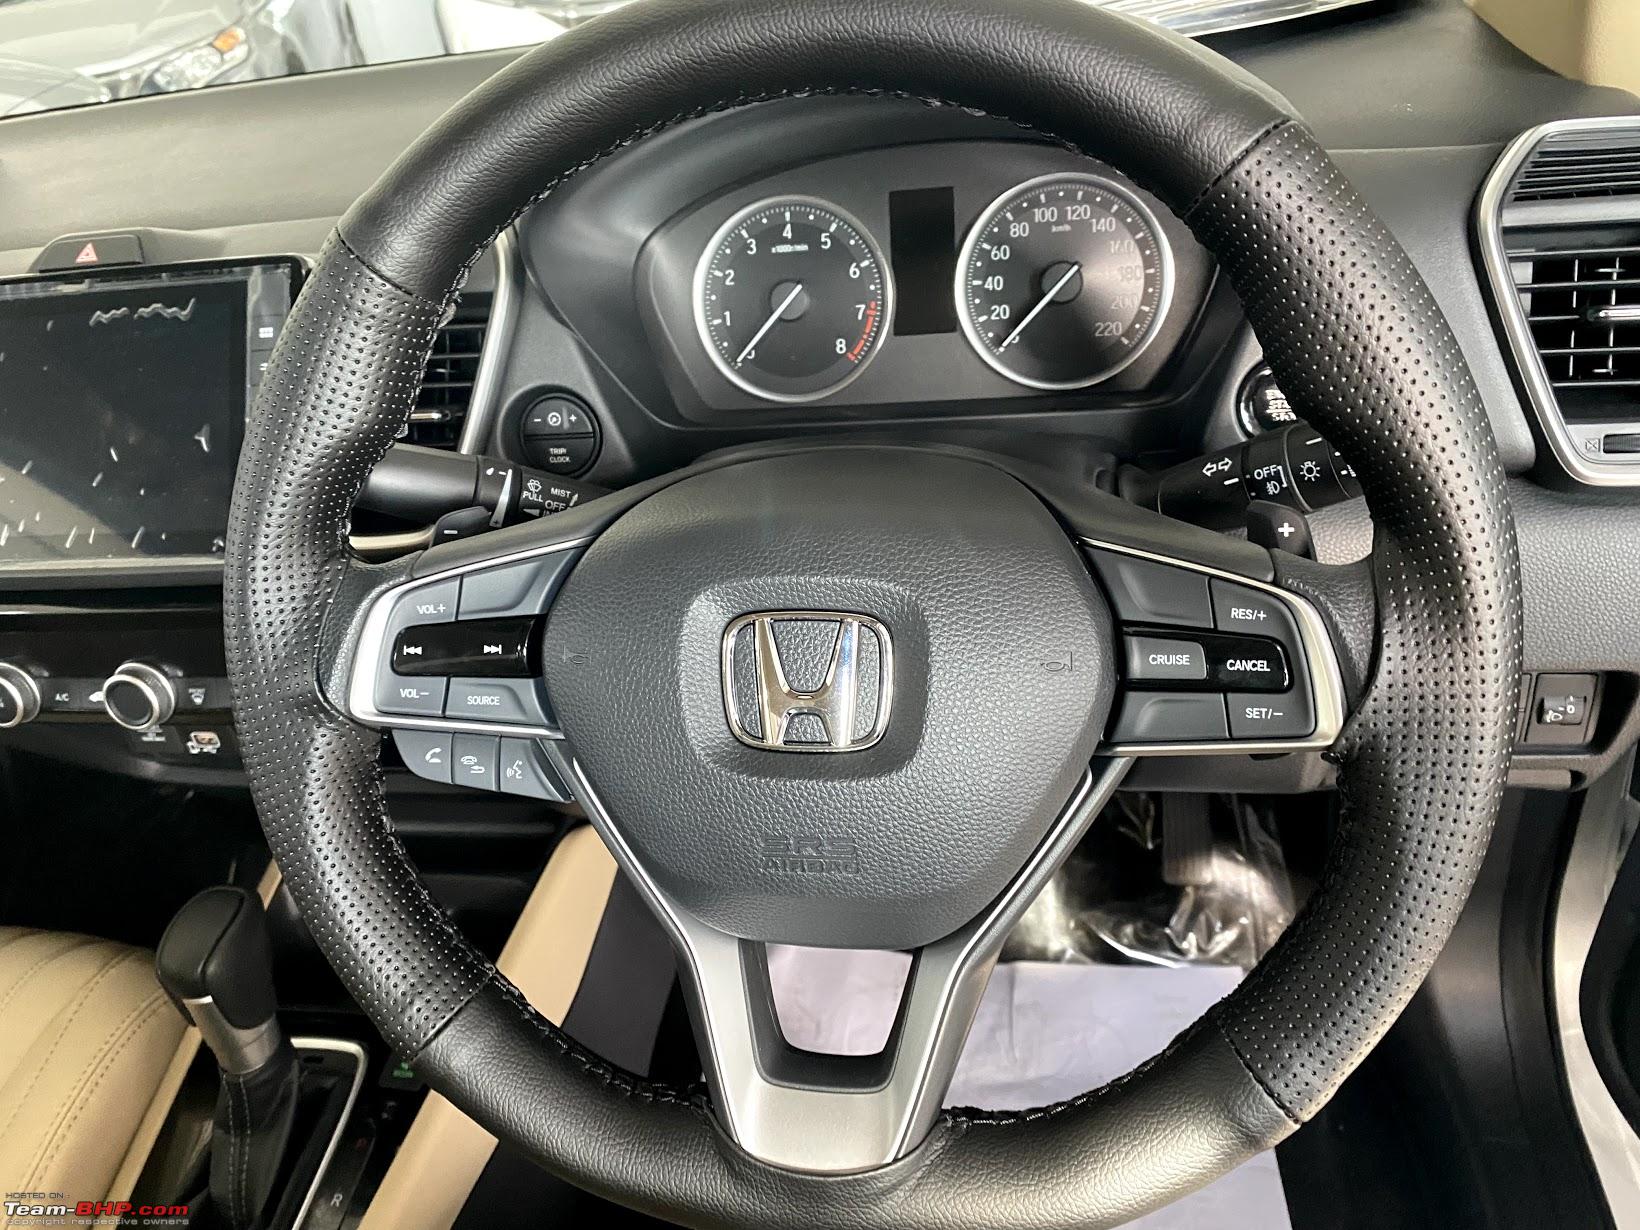 https://www.team-bhp.com/forum/attachments/indian-car-scene/2212709d1632819525-5th-gen-honda-city-india-edit-review-page-62-steering.jpg